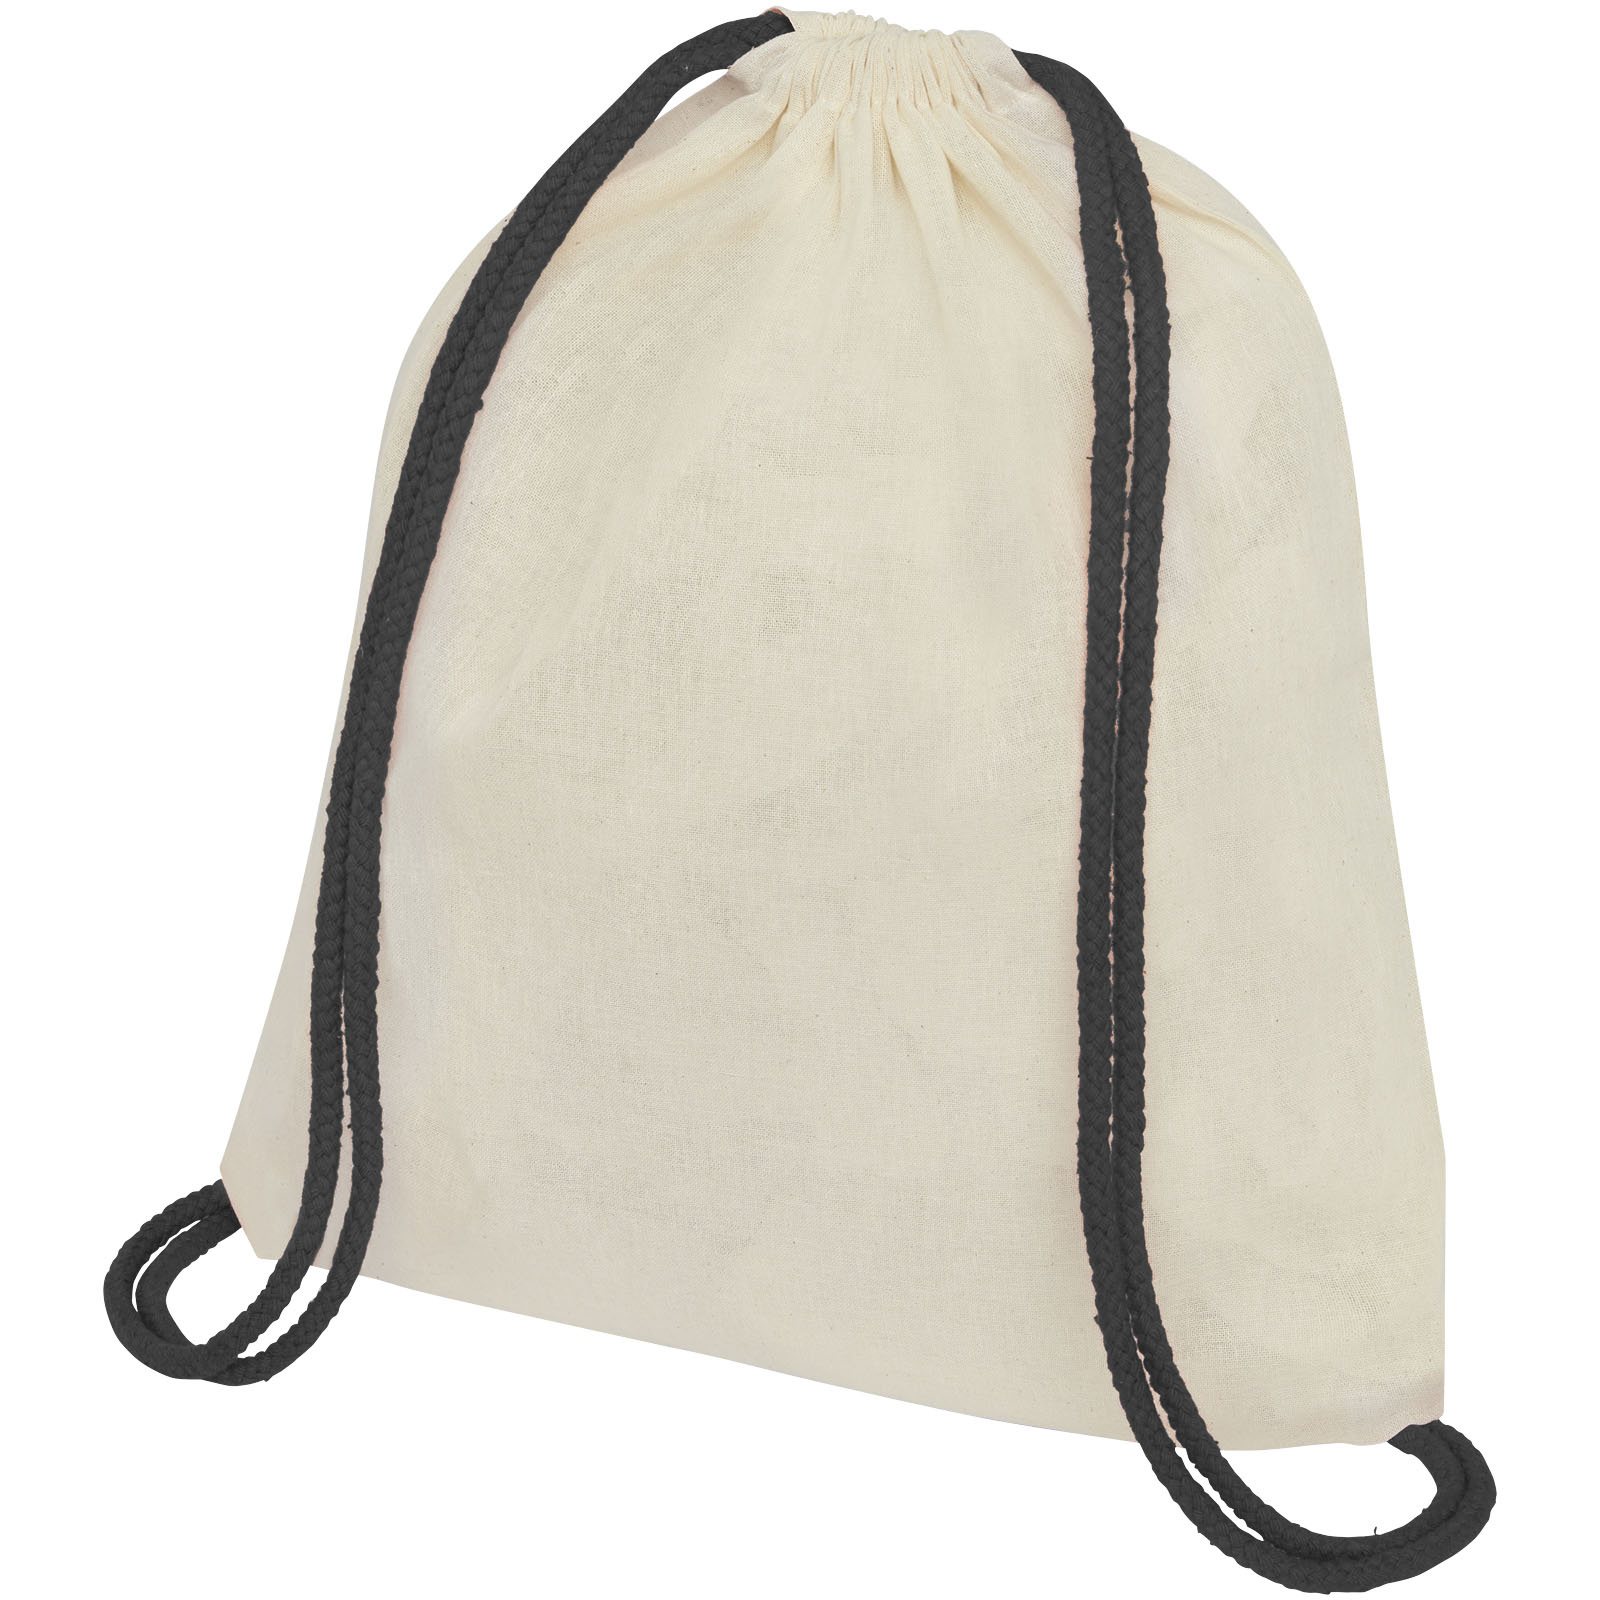 Advertising Drawstring Bags - Oregon 100 g/m² cotton drawstring bag with coloured cords 5L - 0